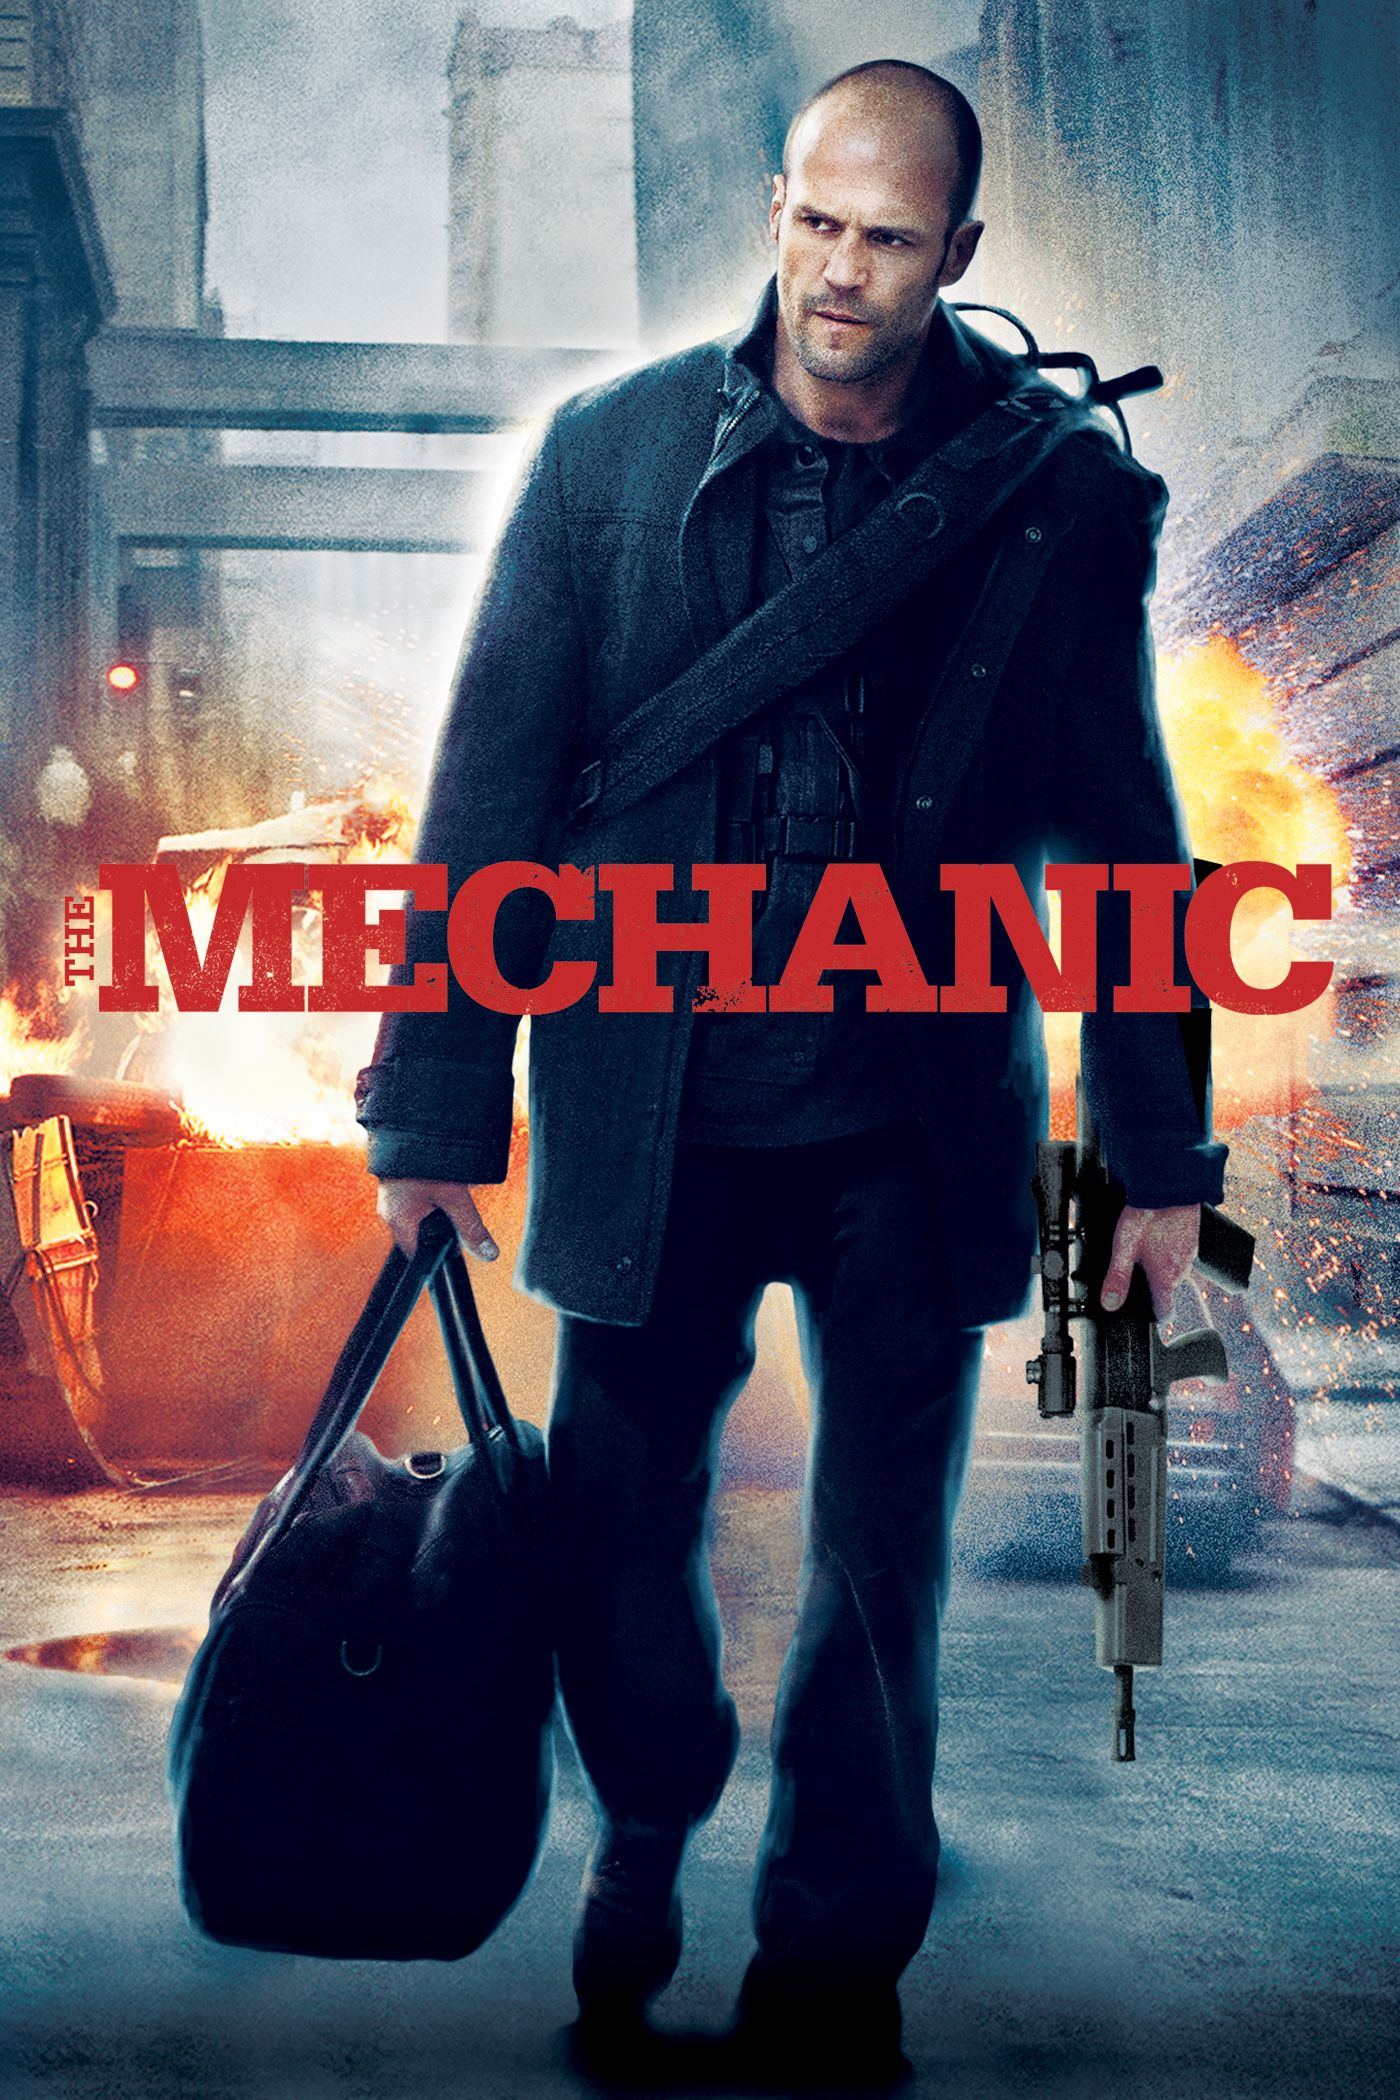 devanand pati recommends The Mechanic Full Movie Online